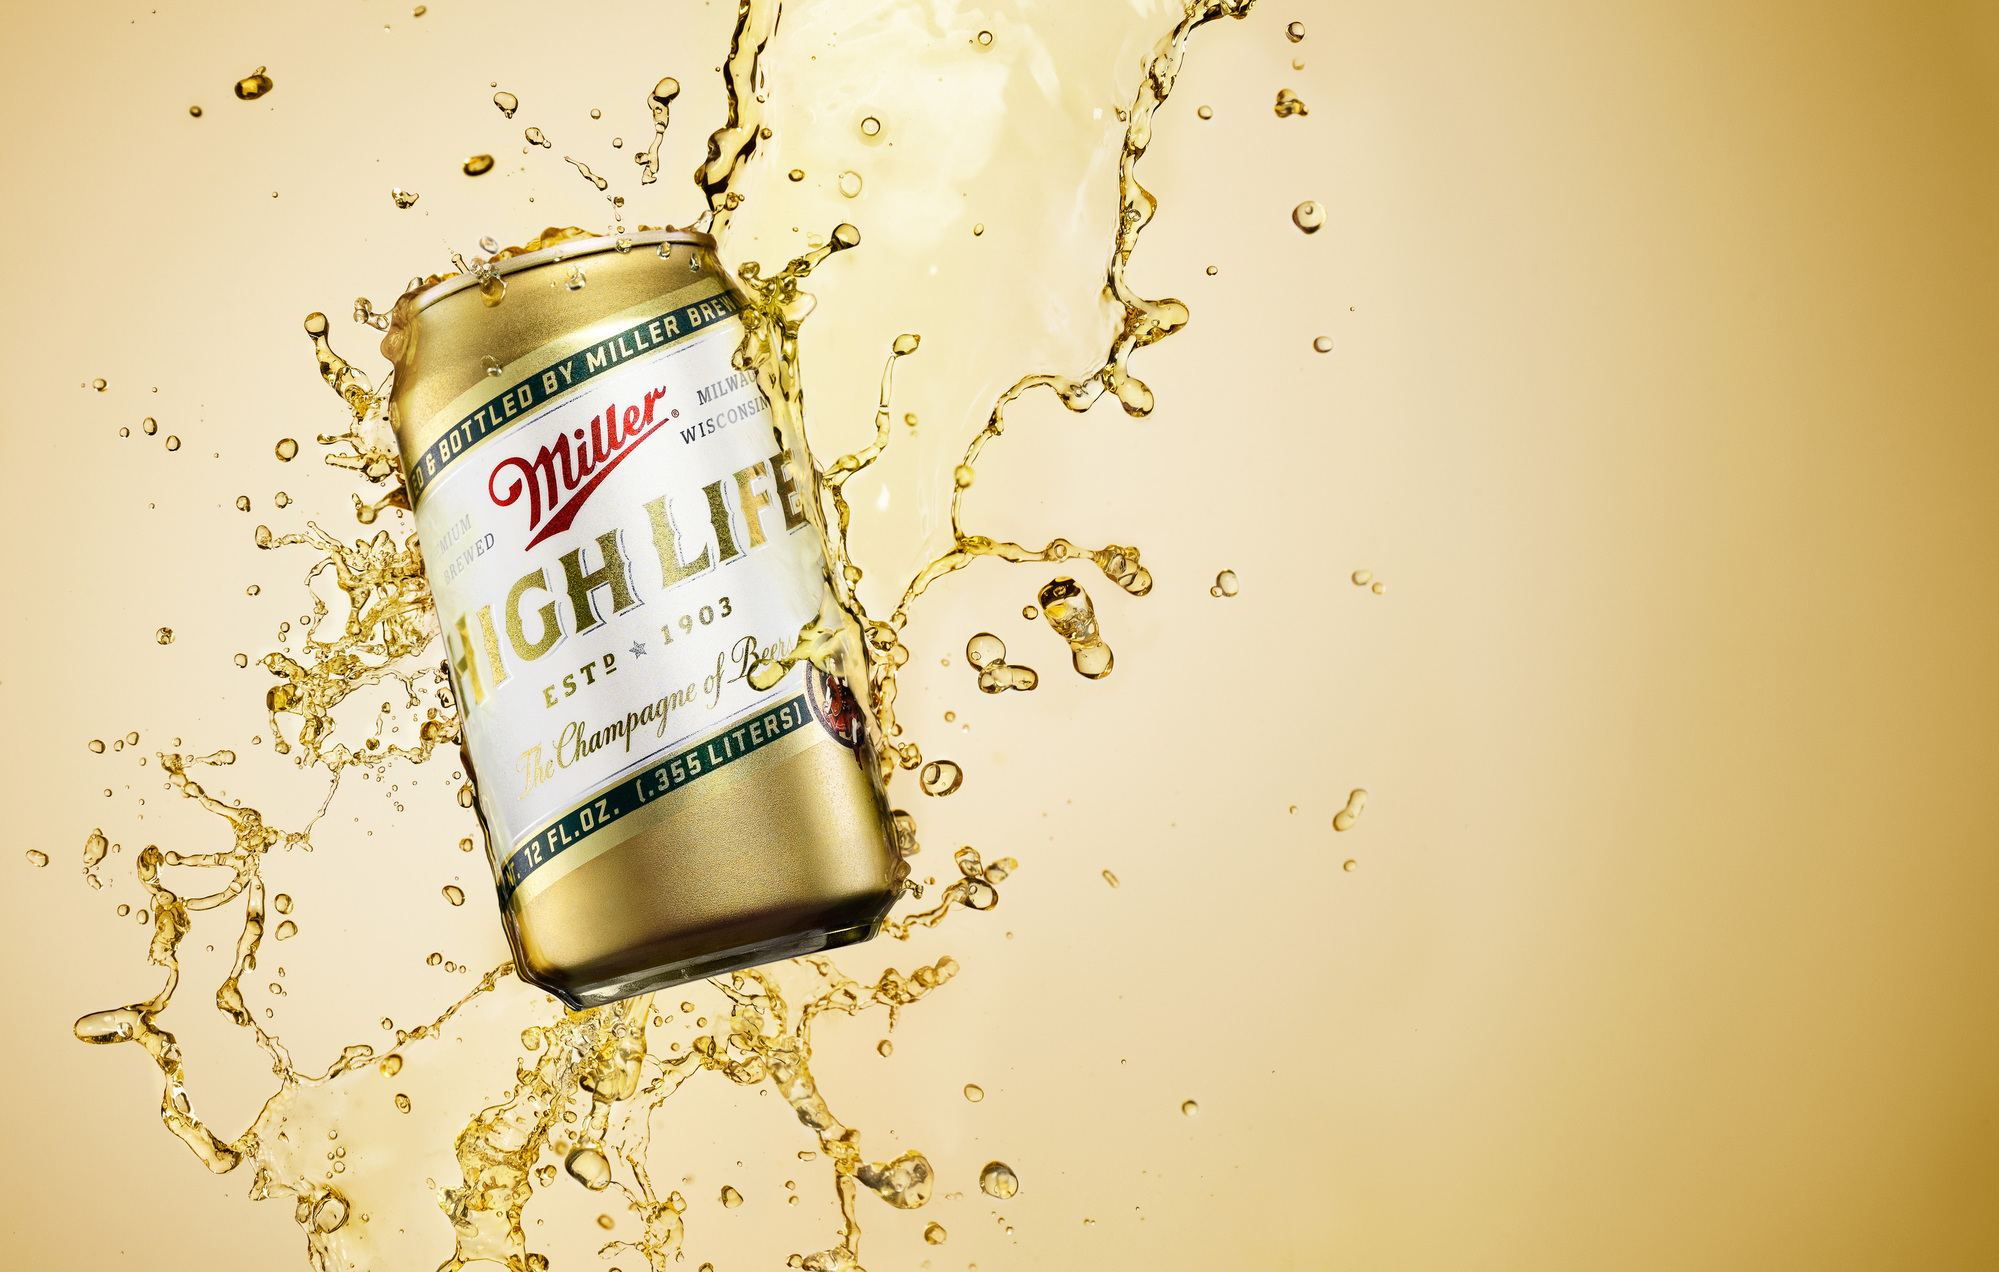 Miller High Life beer can splash photography  by beverage product photographer Timothy Hogan